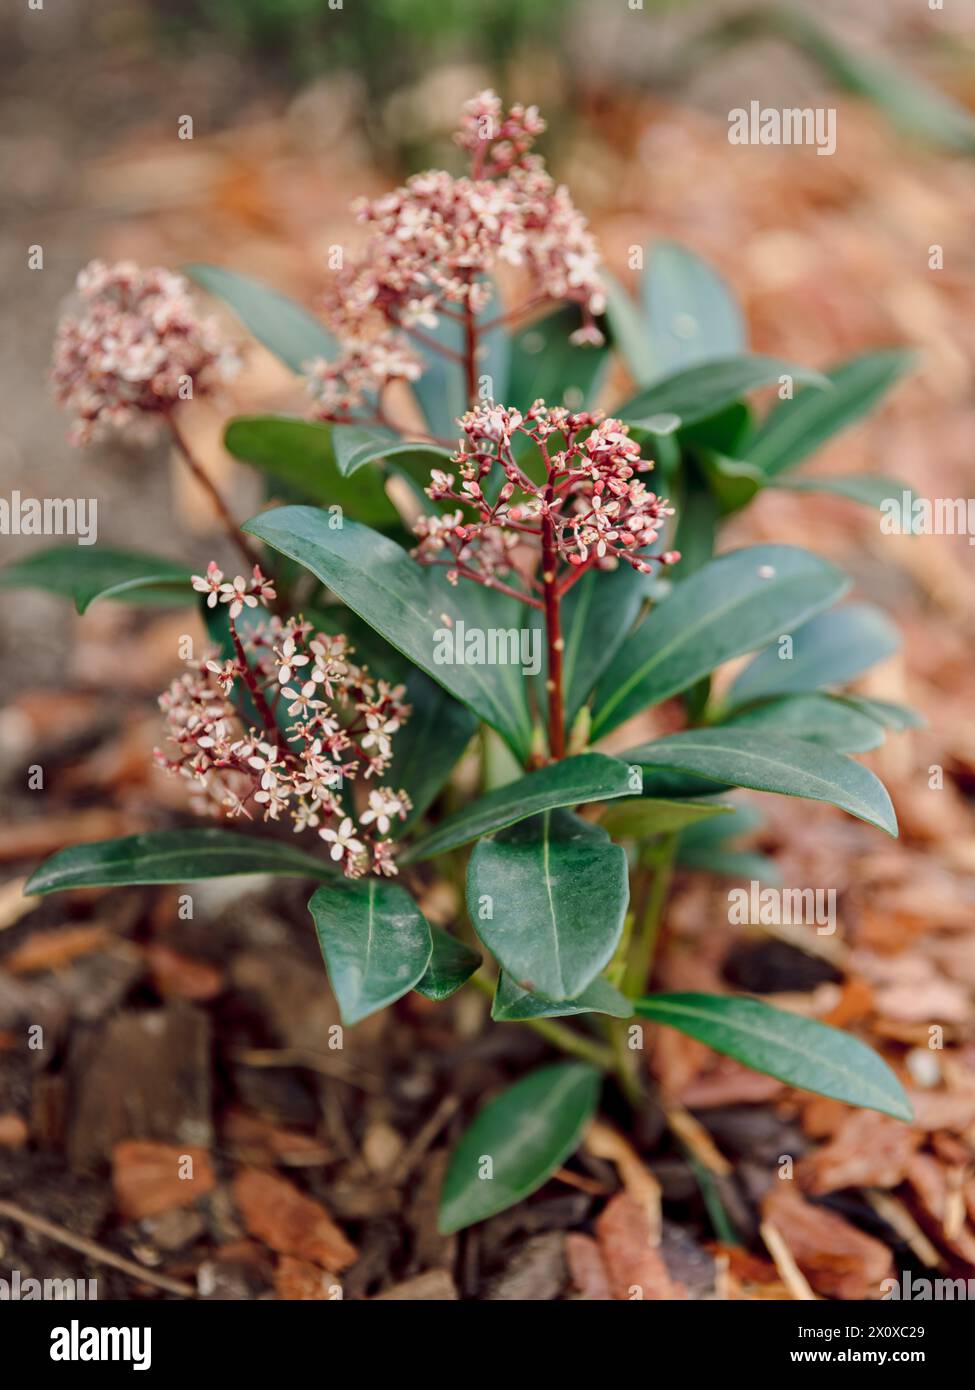 Blooming Skimmia japonica Rubella, close up view Stock Photo